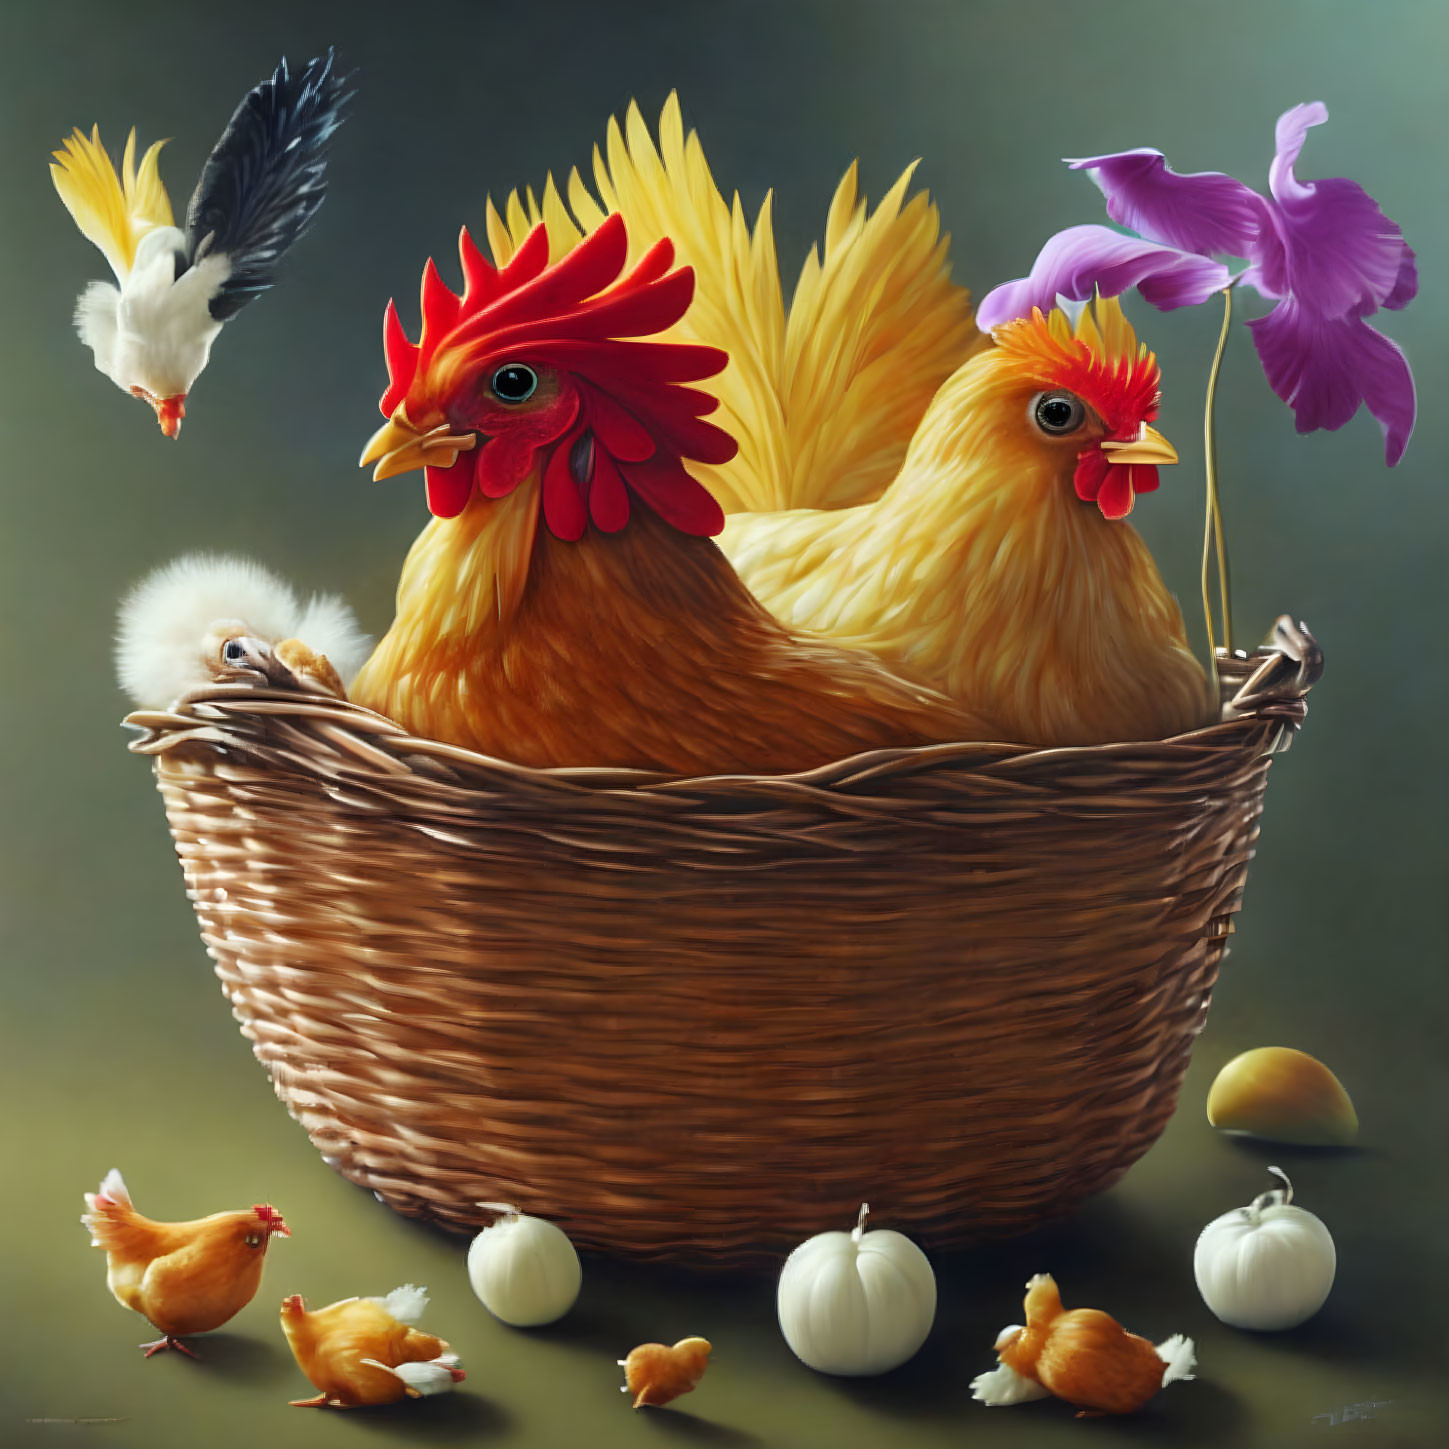 Colorful painting of chickens, chicks, eggs, and butterflies in wicker basket